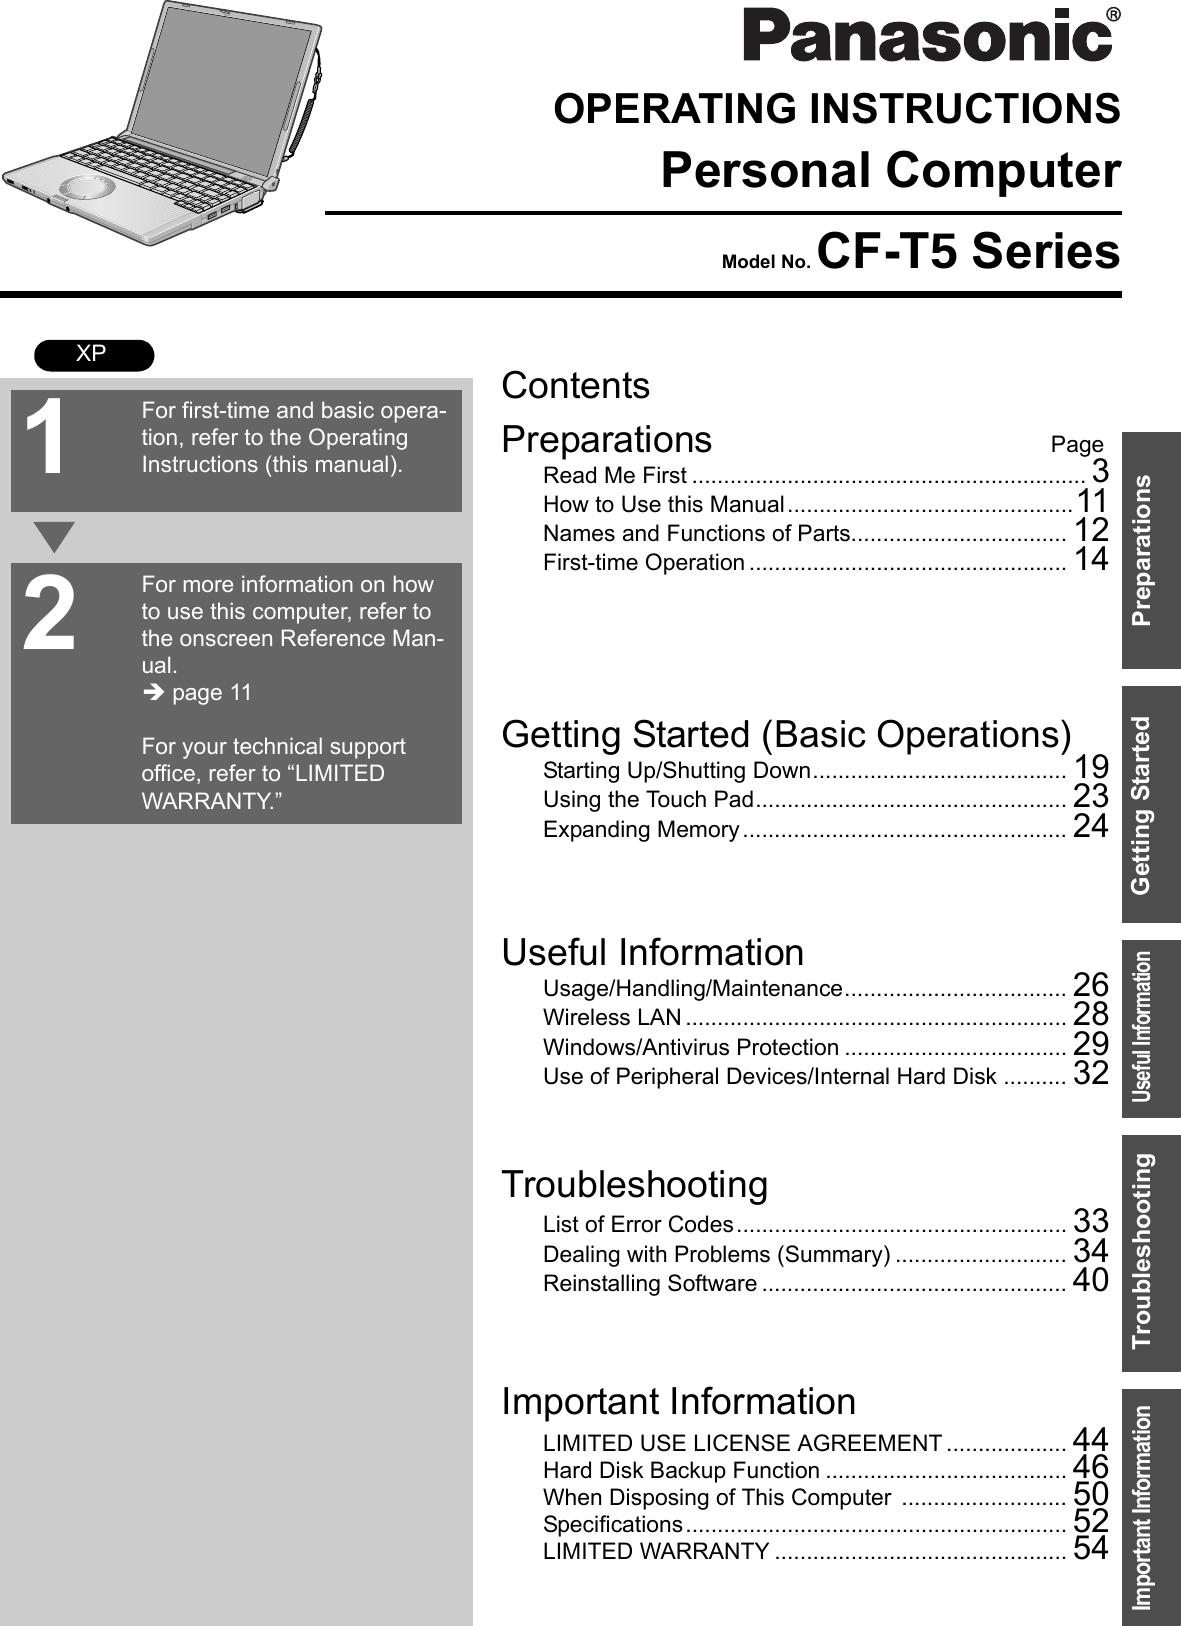 ContentsPreparations PageGetting Started (Basic Operations)TroubleshootingUseful InformationImportant InformationPreparationsGetting StartedUseful InformationTroubleshootingImportant InformationOPERATING INSTRUCTIONSPersonal ComputerModel No. CF-T5 SeriesXPRead Me First .............................................................. 3How to Use this Manual.............................................11Names and Functions of Parts.................................. 12First-time Operation .................................................. 14Starting Up/Shutting Down........................................ 19Using the Touch Pad................................................. 23Expanding Memory................................................... 24Usage/Handling/Maintenance................................... 26Wireless LAN ............................................................ 28Windows/Antivirus Protection ................................... 29Use of Peripheral Devices/Internal Hard Disk .......... 32List of Error Codes.................................................... 33Dealing with Problems (Summary) ........................... 34Reinstalling Software ................................................ 40LIMITED USE LICENSE AGREEMENT ................... 44Hard Disk Backup Function ...................................... 46When Disposing of This Computer .......................... 50Specifications............................................................ 52LIMITED WARRANTY .............................................. 54For first-time and basic opera-tion, refer to the Operating Instructions (this manual).For more information on how to use this computer, refer to the onscreen Reference Man-ual.Î page 11For your technical support office, refer to “LIMITED WARRANTY.”21